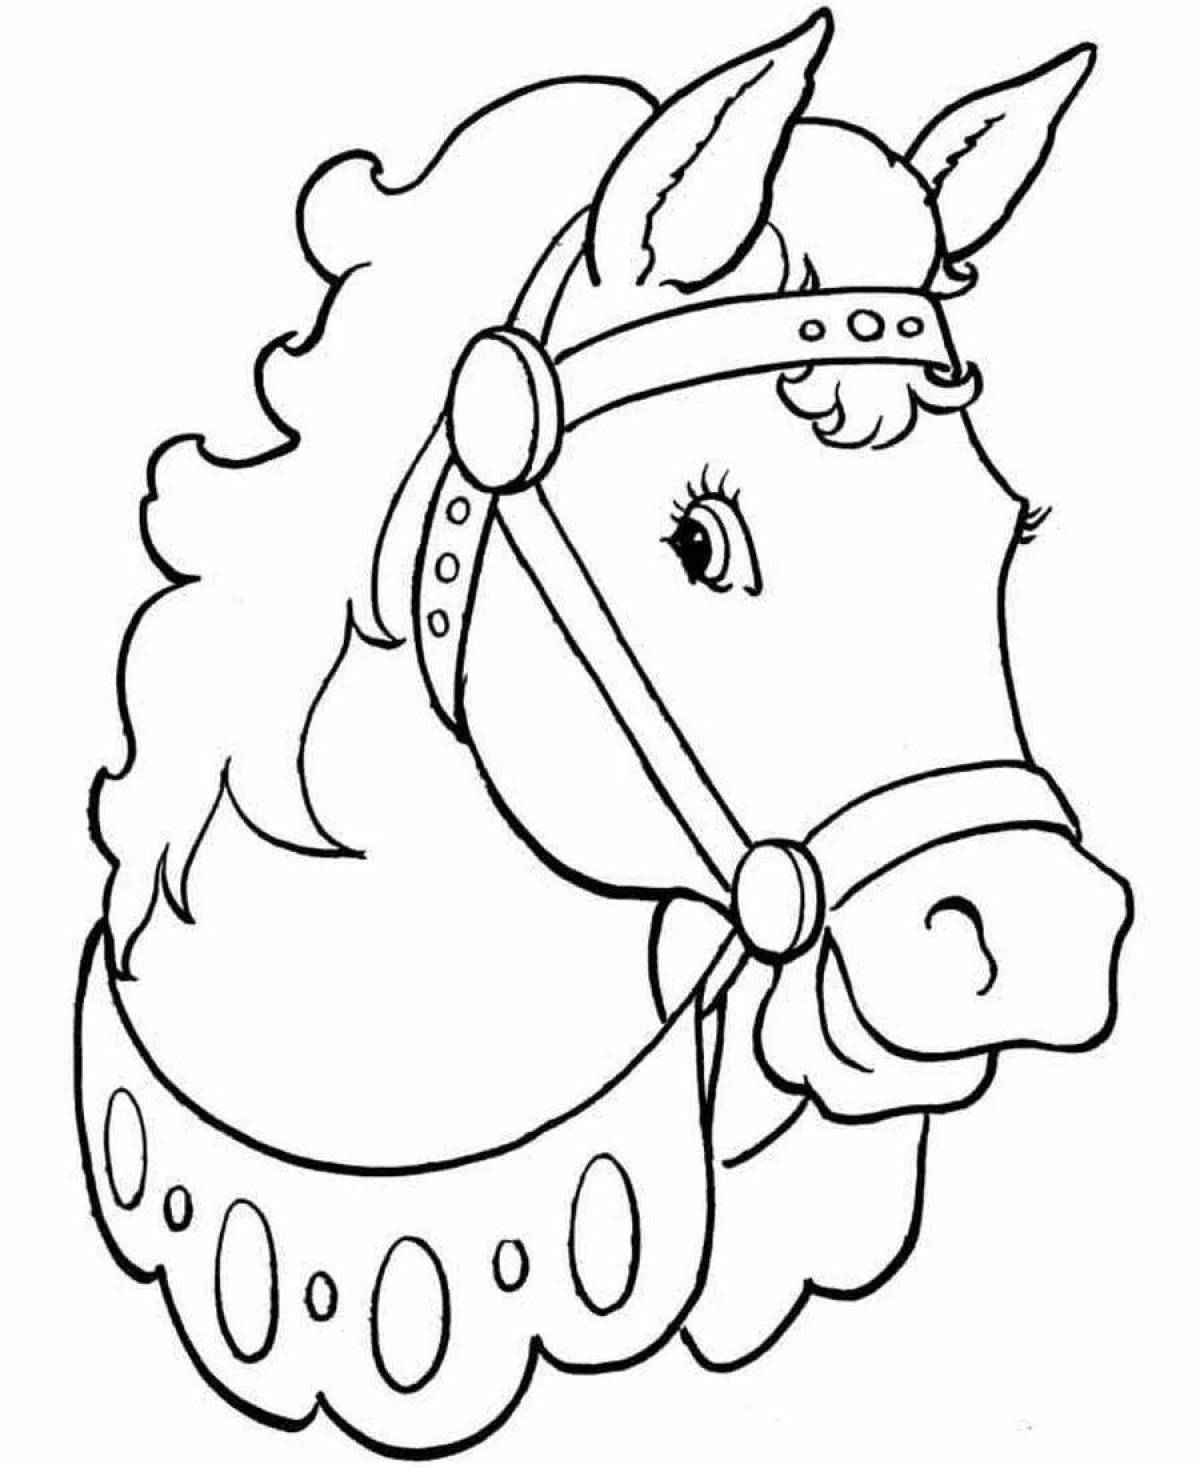 Nice horse head coloring book